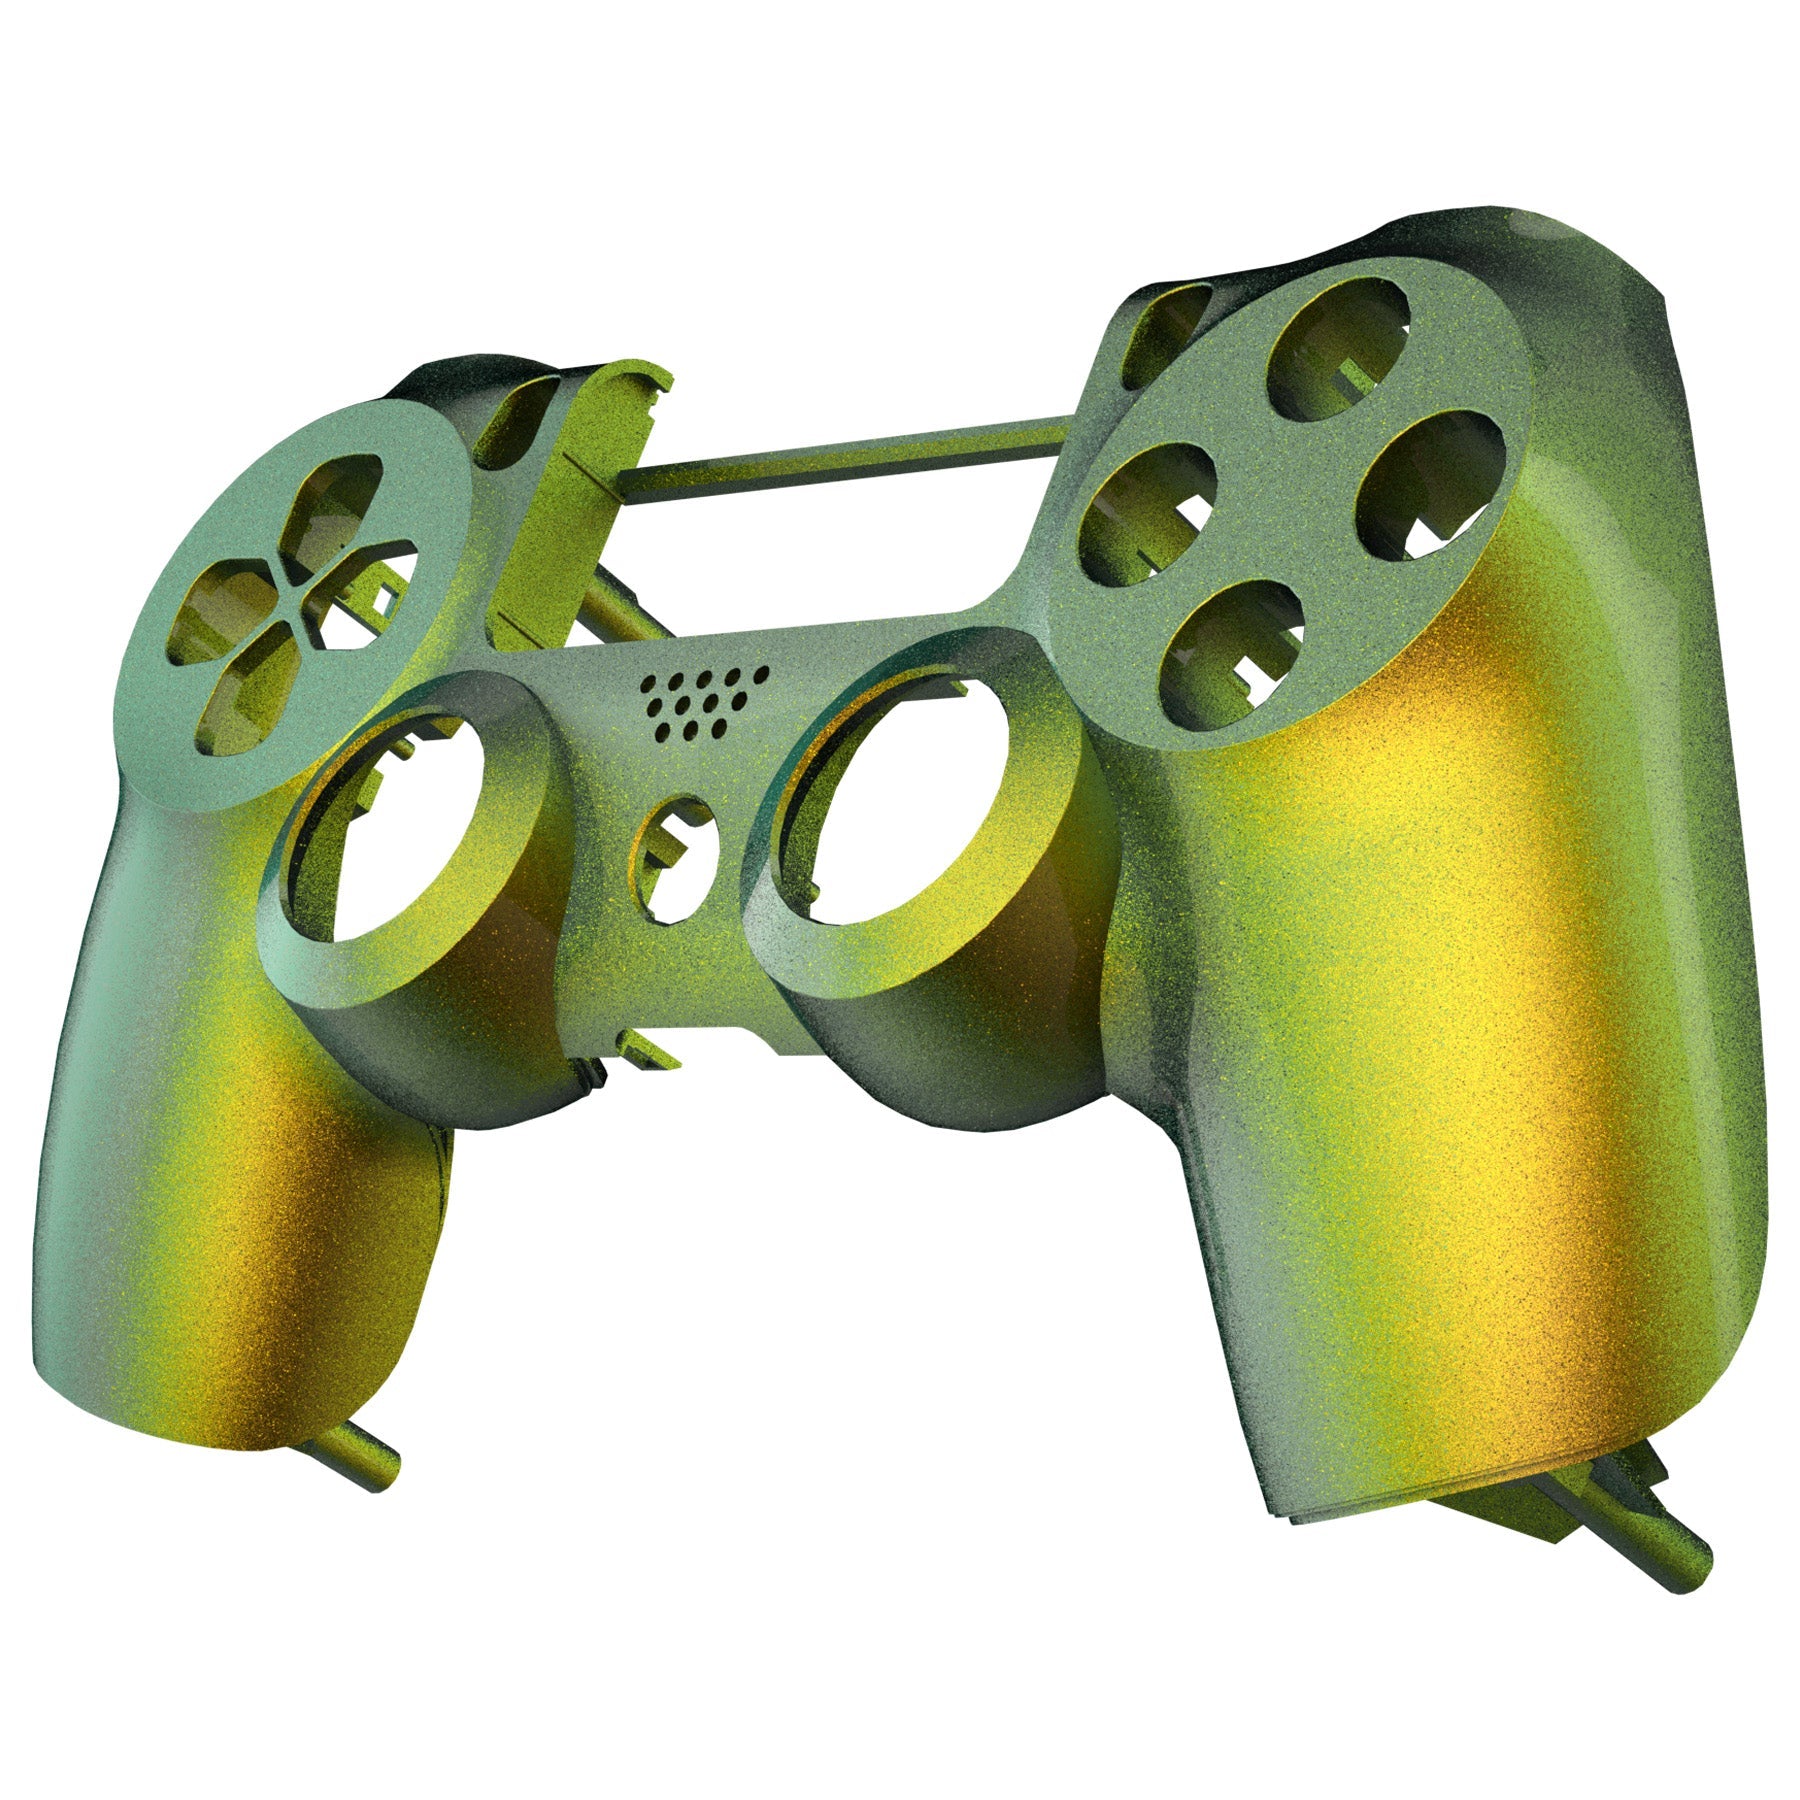 eXtremeRate Retail Green and Gold Chameleon Front Housing Shell Faceplate for ps4 Slim Pro Controller (CUH-ZCT2 JDM-040 JDM-050 JDM-055) - SP4FP02